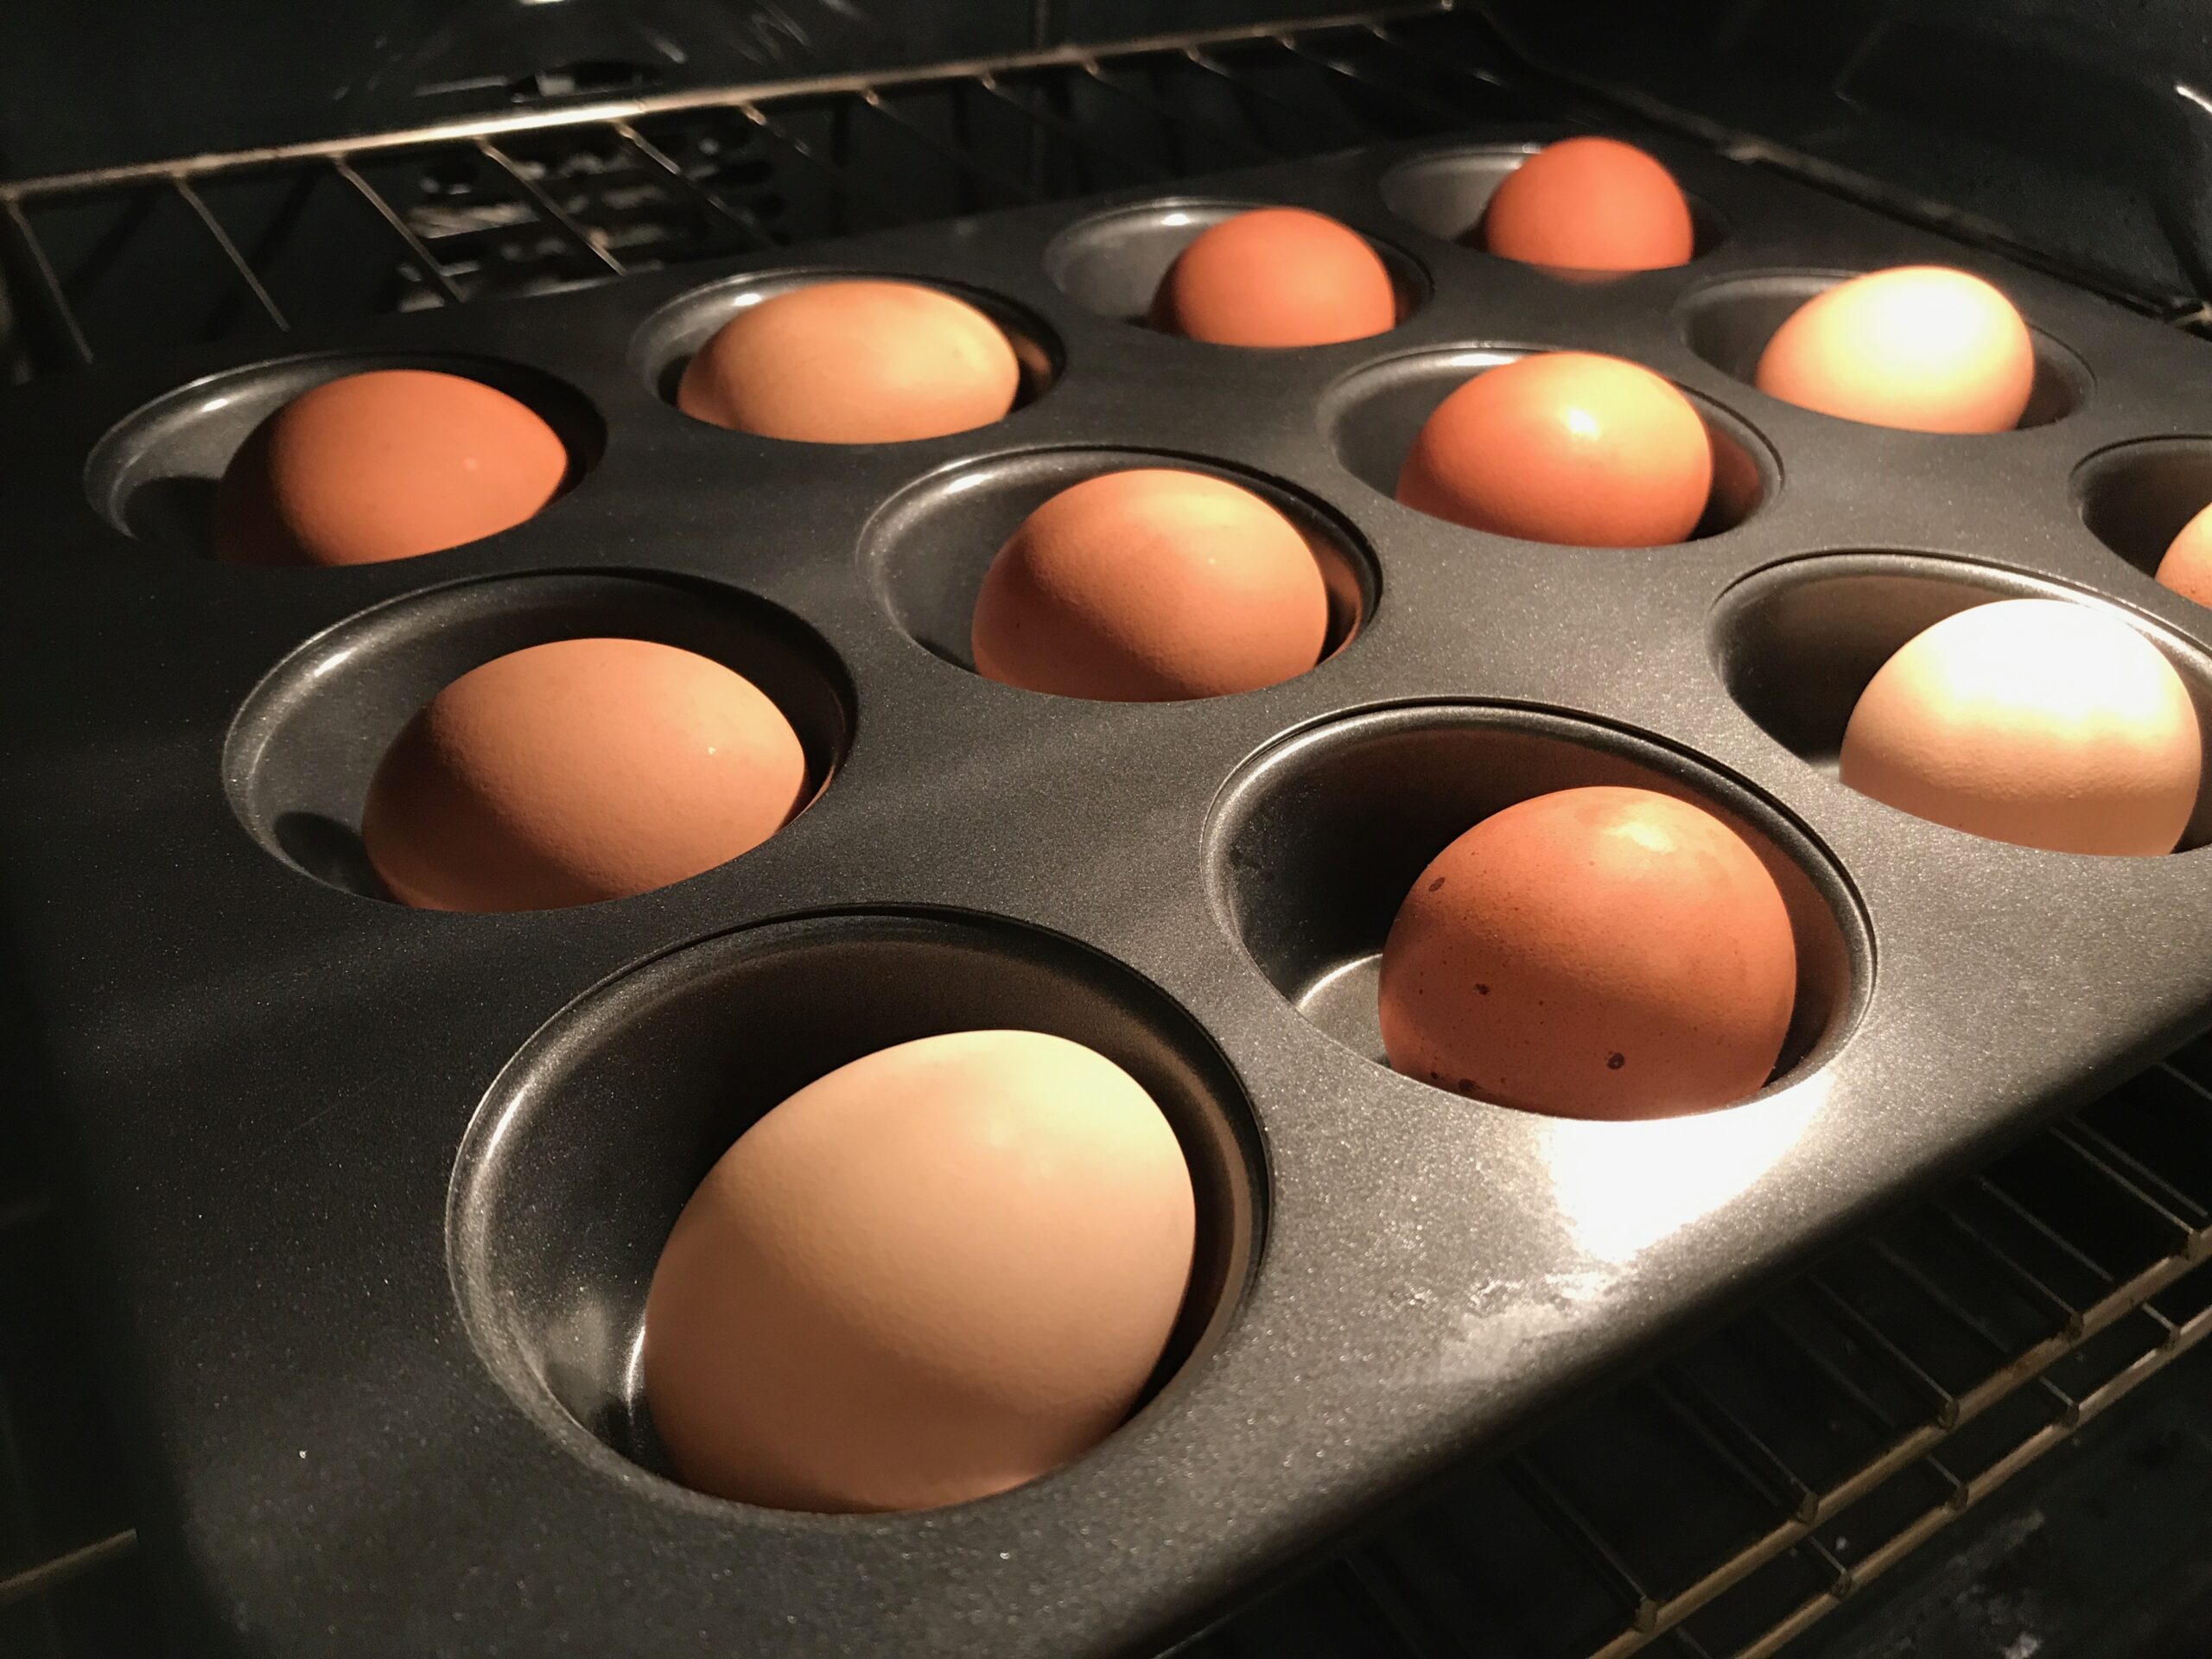 Whole eggs in a muffin pan, inside of an oven